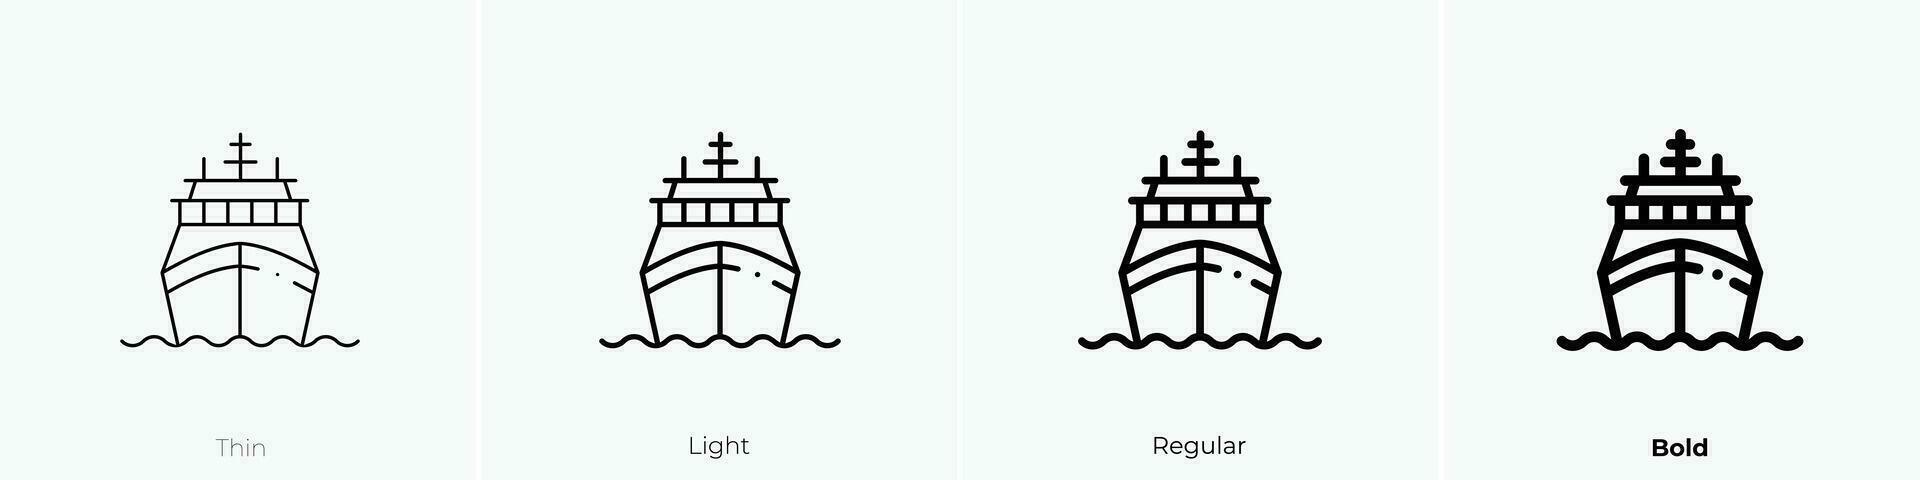 ship icon. Thin, Light, Regular And Bold style design isolated on white background vector